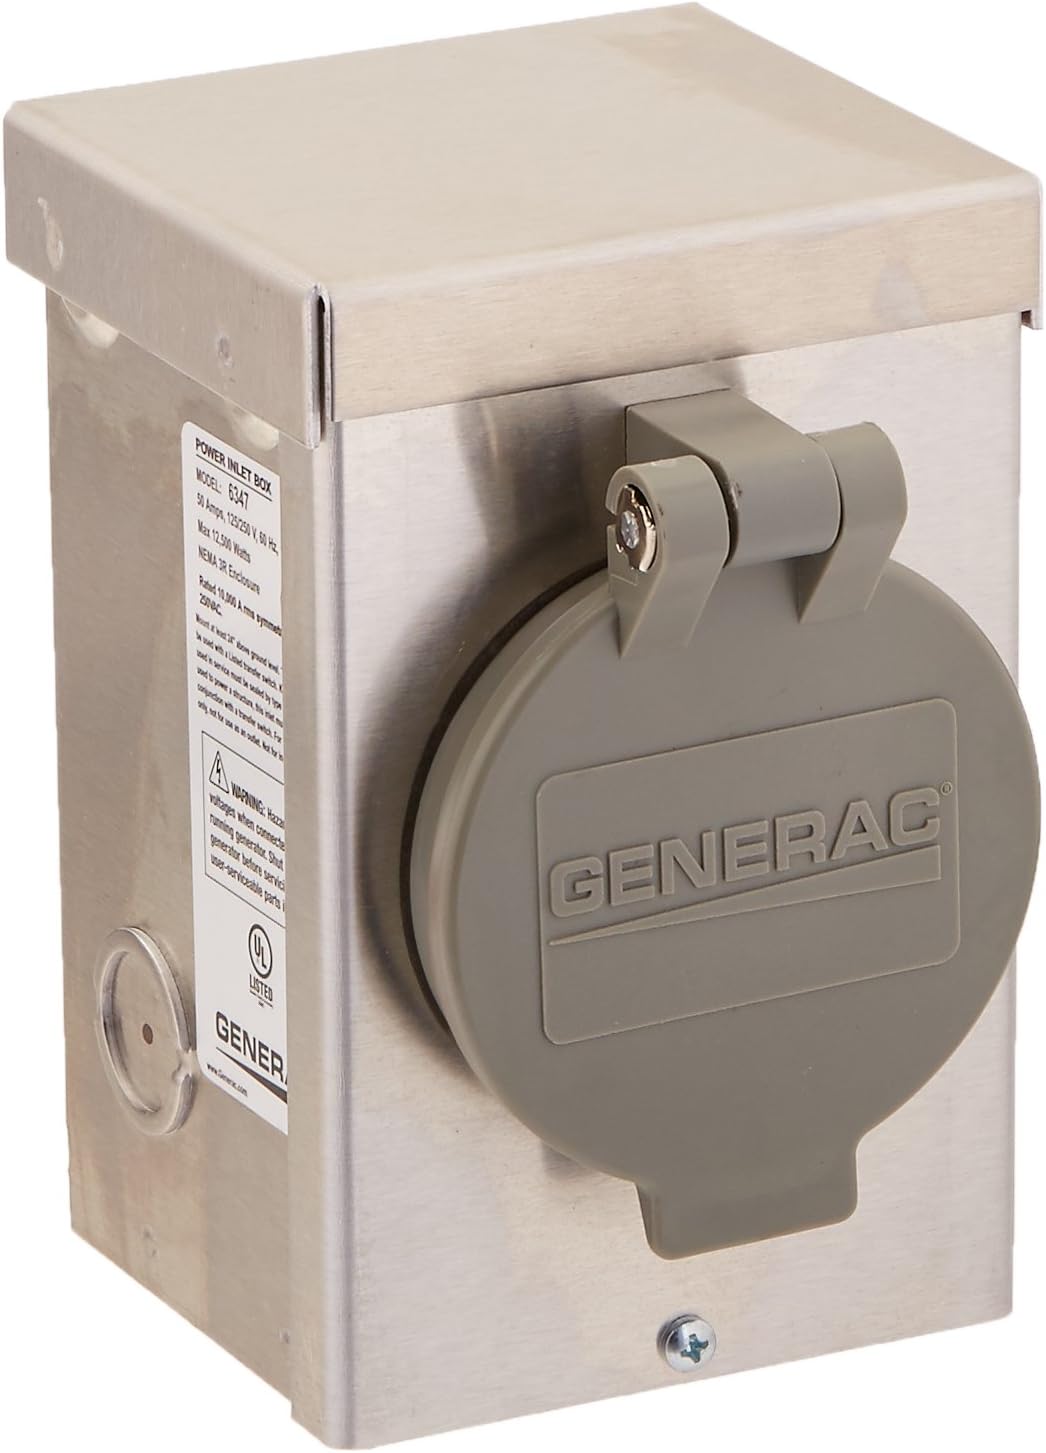 Generac 6347 50-Amp 125/250V Aluminum Power Inlet Box - Weather-Resistant Outdoor Generator Connection, Silver